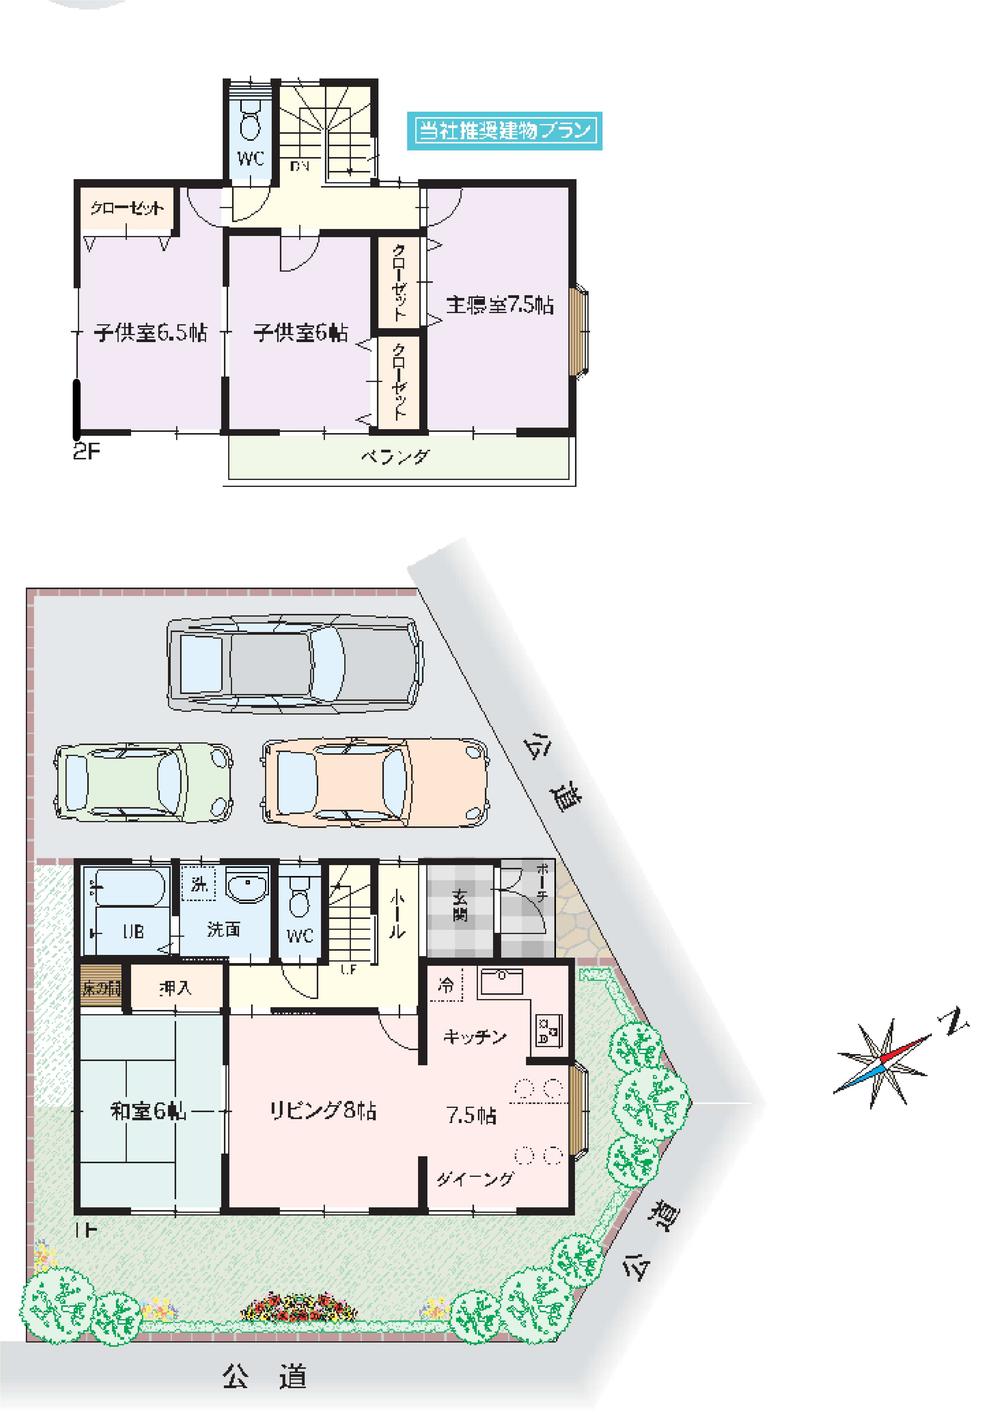 Compartment view + building plan example. Building plan example (A) 4LDK, Land price 11,450,000 yen, Land area 137.65 sq m , Building price 19,640,000 yen, Building area 103.51 sq m